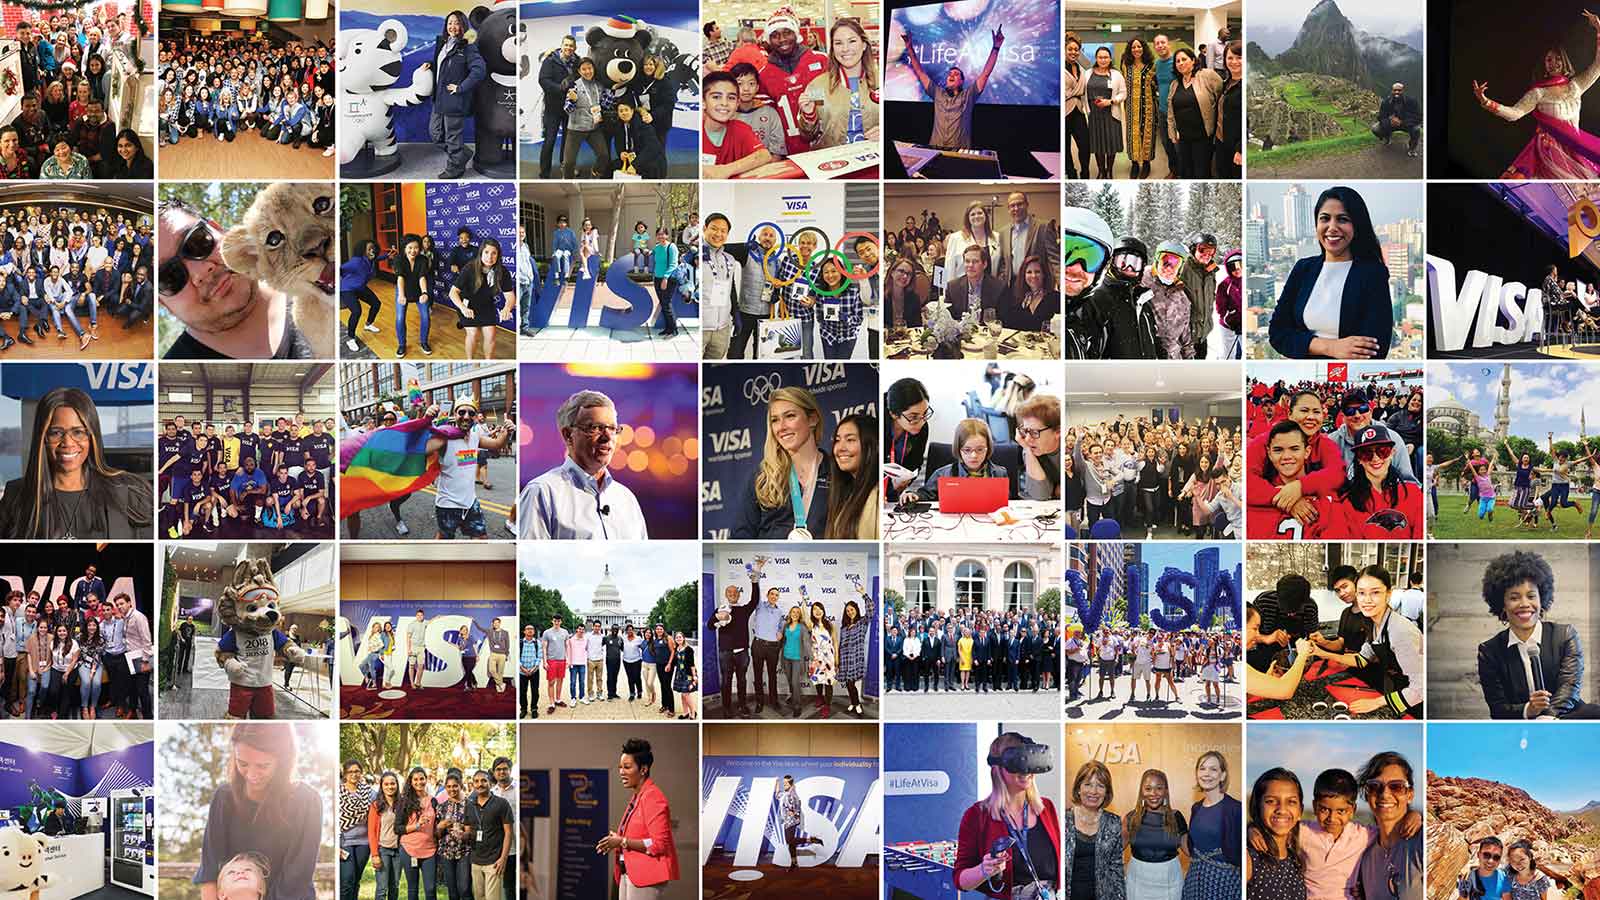 Grid of images of employees doing various activities at Visa